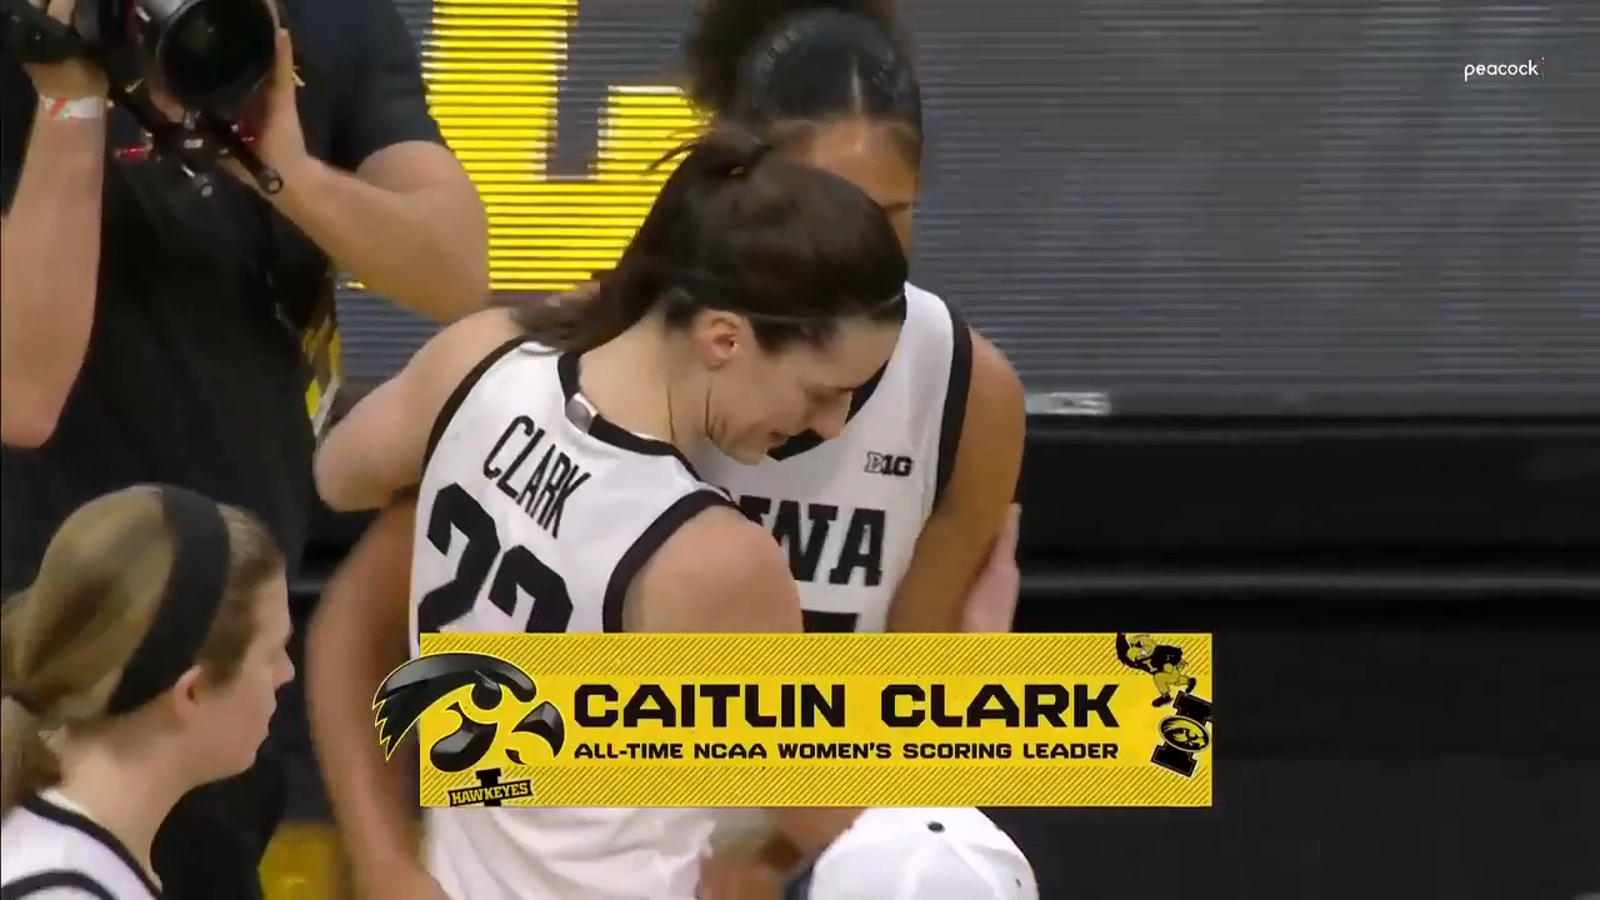 Iowa's Caitlin Clark breaks the NCAA women's scoring record with a must-see 3-pointer vs. Michigan